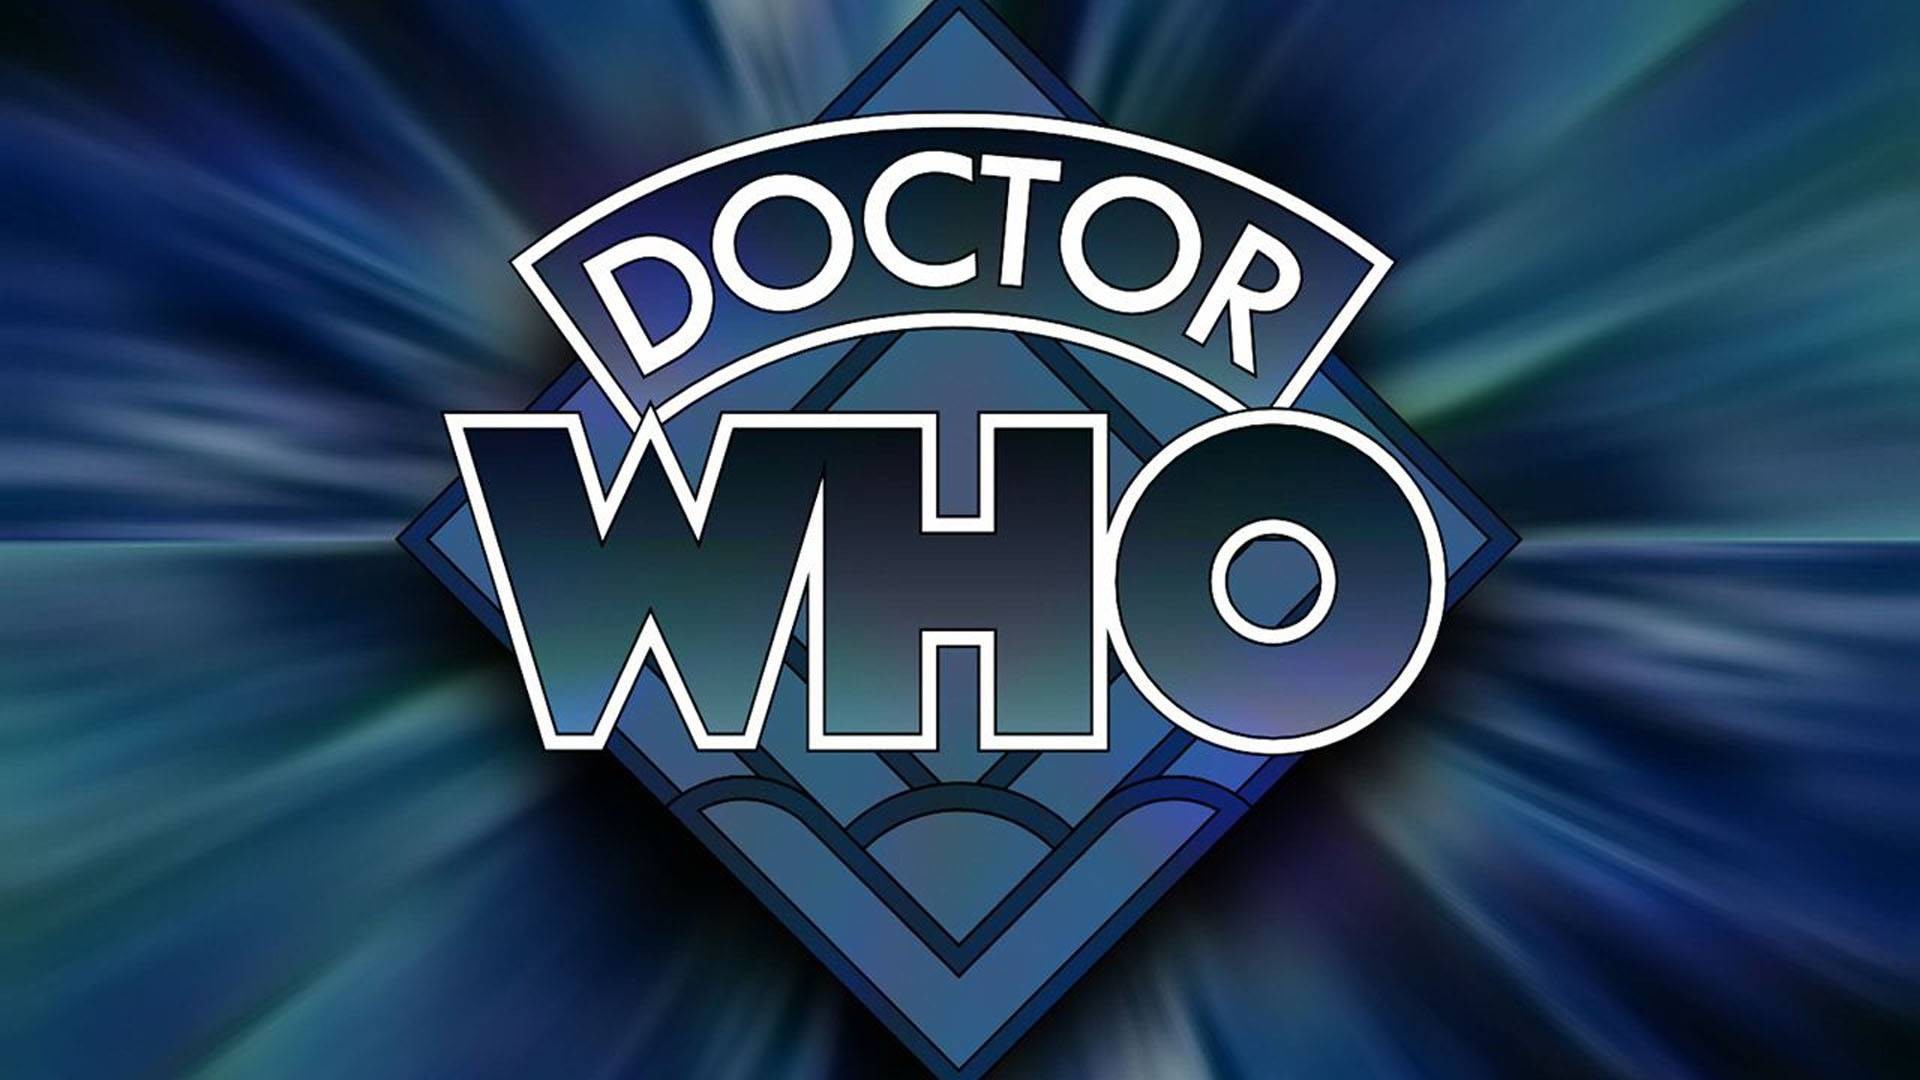 General 1920x1080 Doctor Who logo TV series science fiction